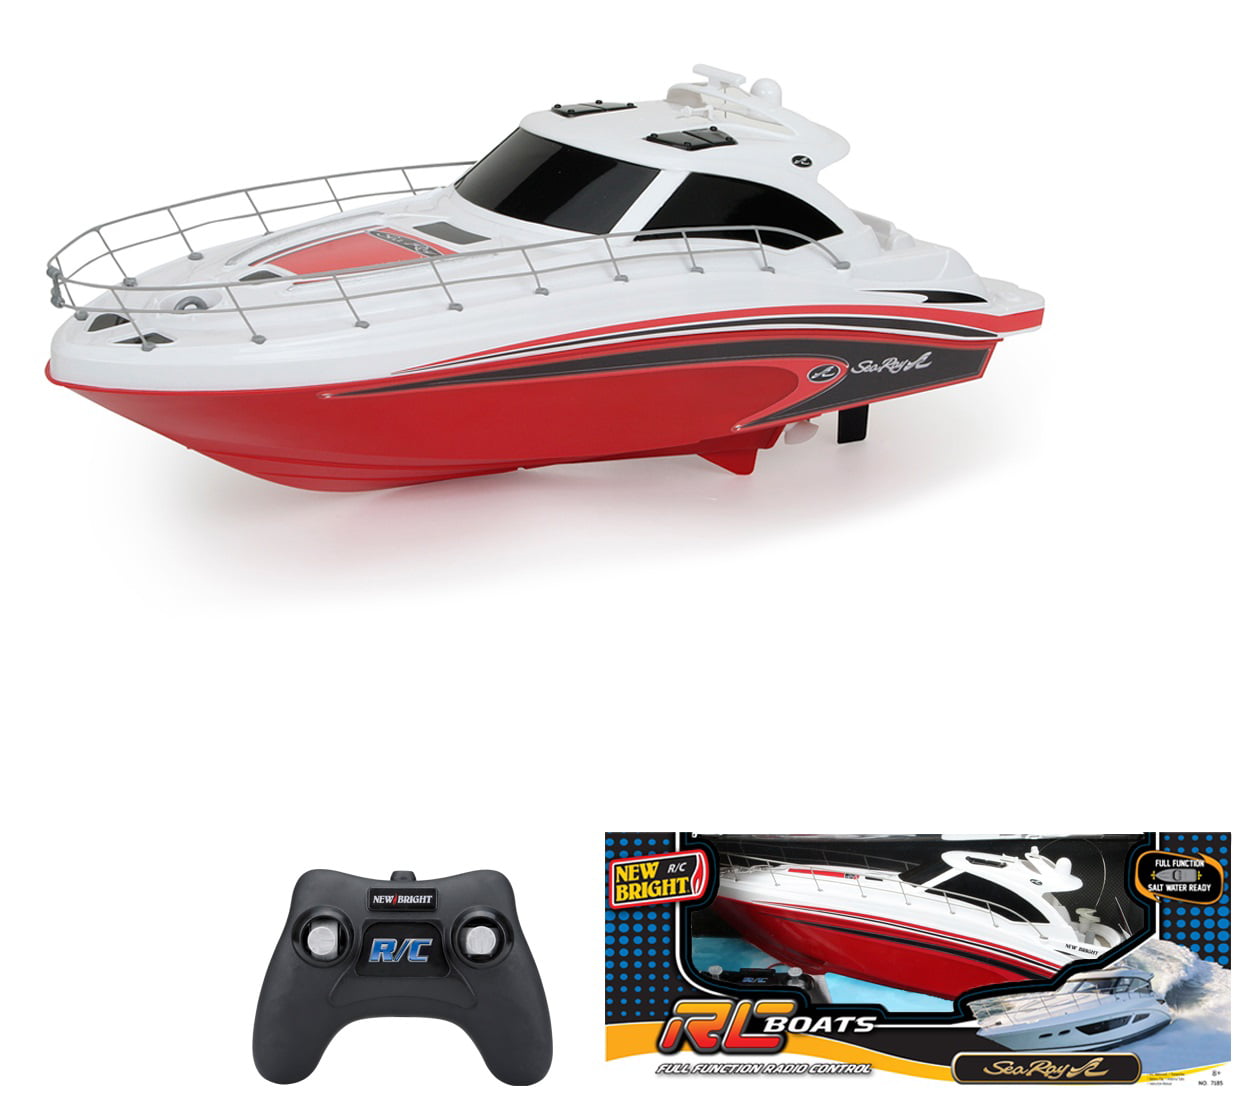 Full-Function Sea Ray Boat, Red 